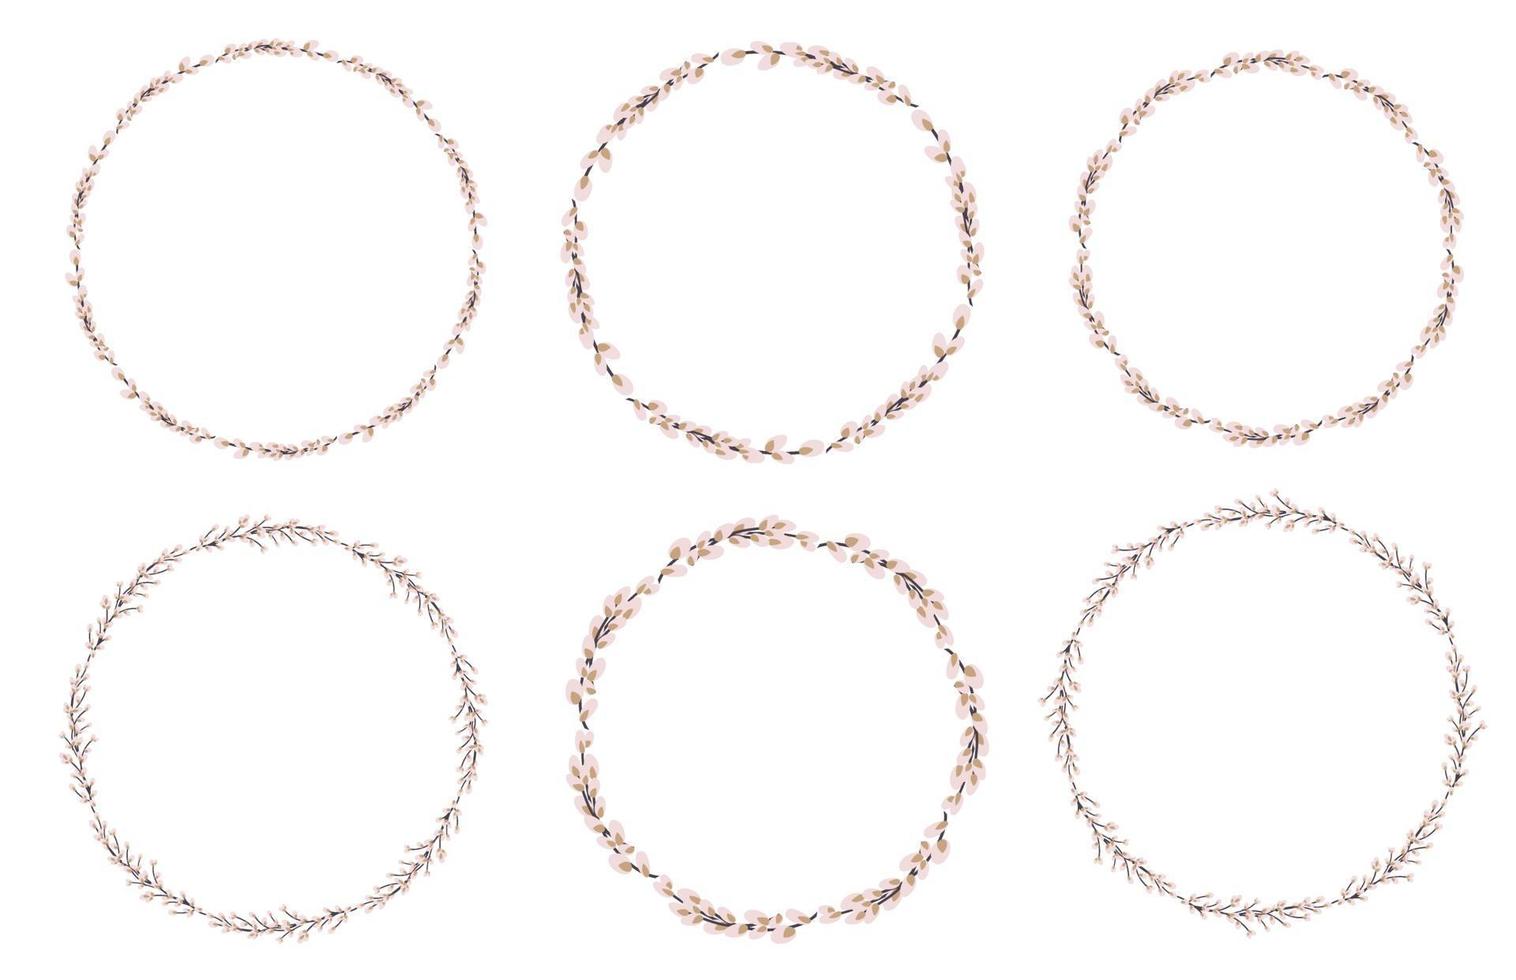 Willow wreath set. Easter round willow wreath vector